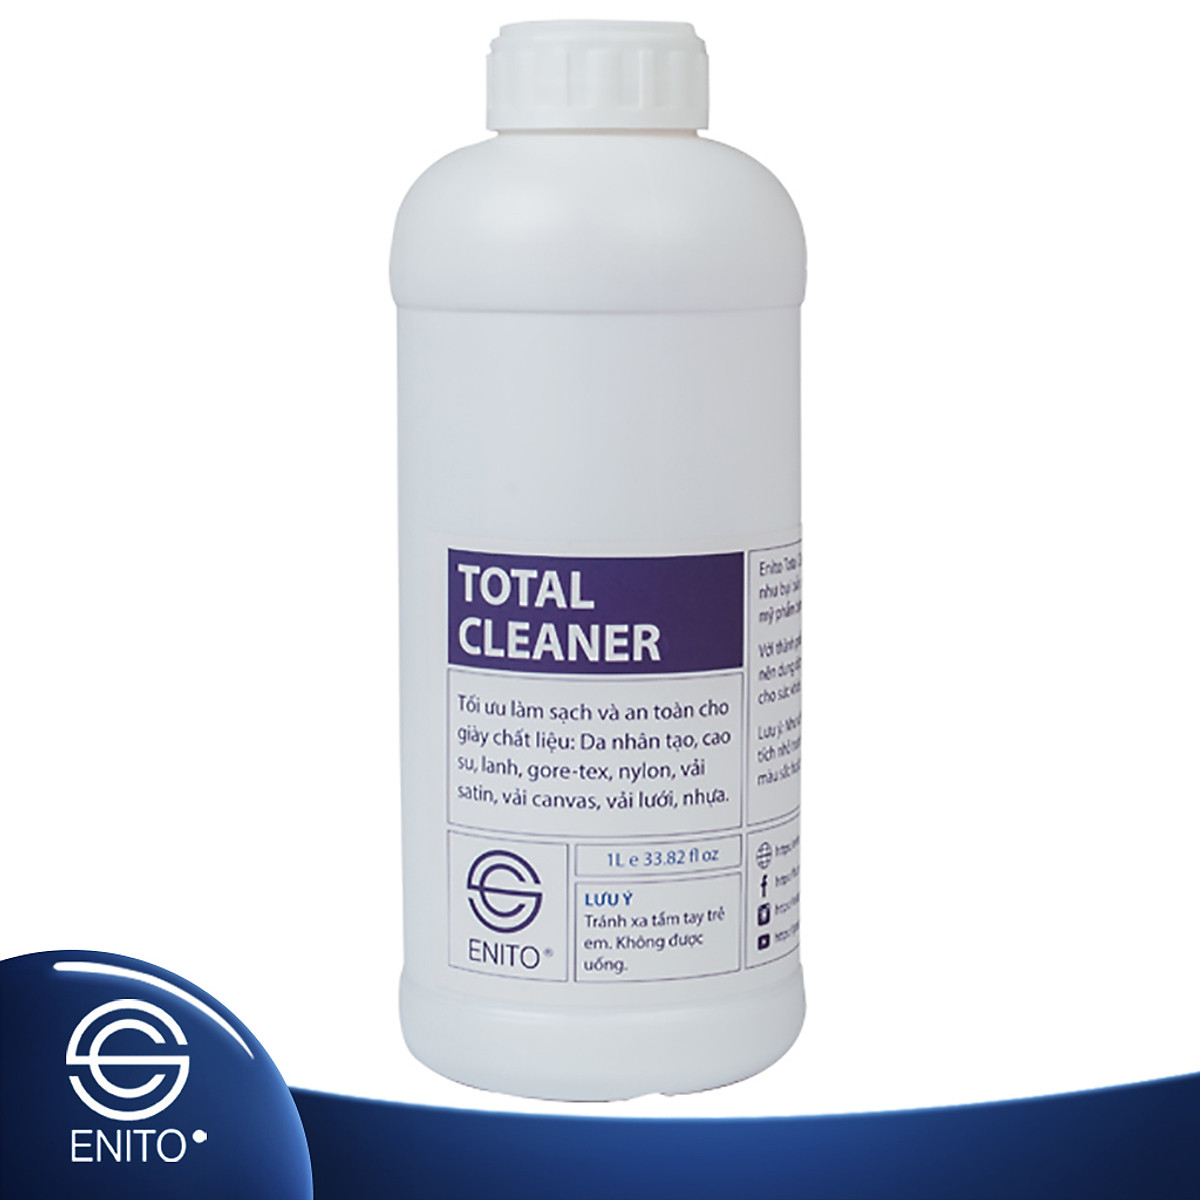 Can dung dịch vệ sinh giày Enito Total Cleaner 1000ml